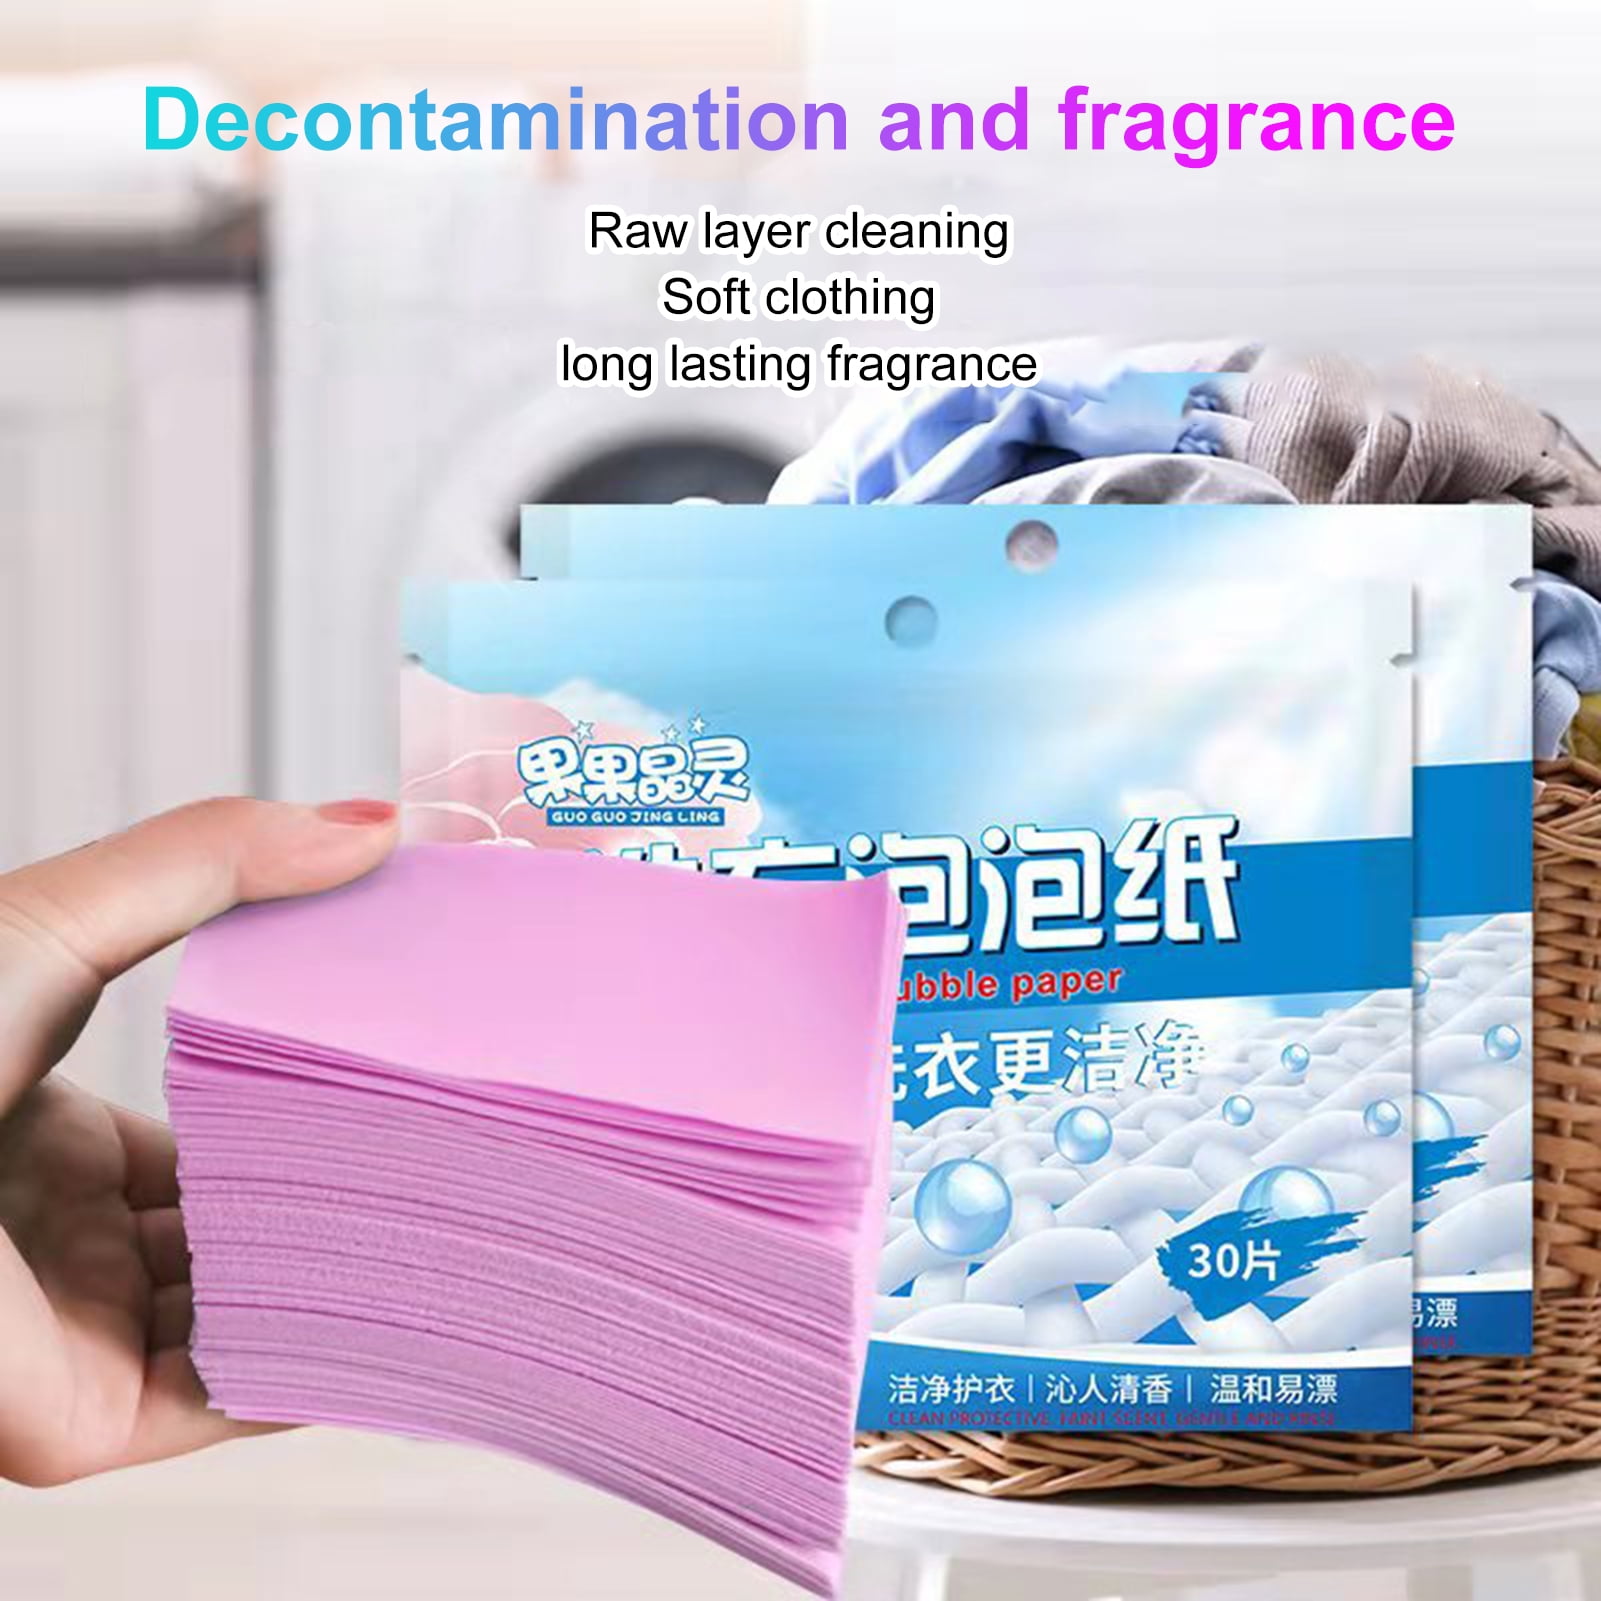 UDIYO 60Pcs Laundry Detergent Sheets, Hypoallergenic Unscented Laundry ...